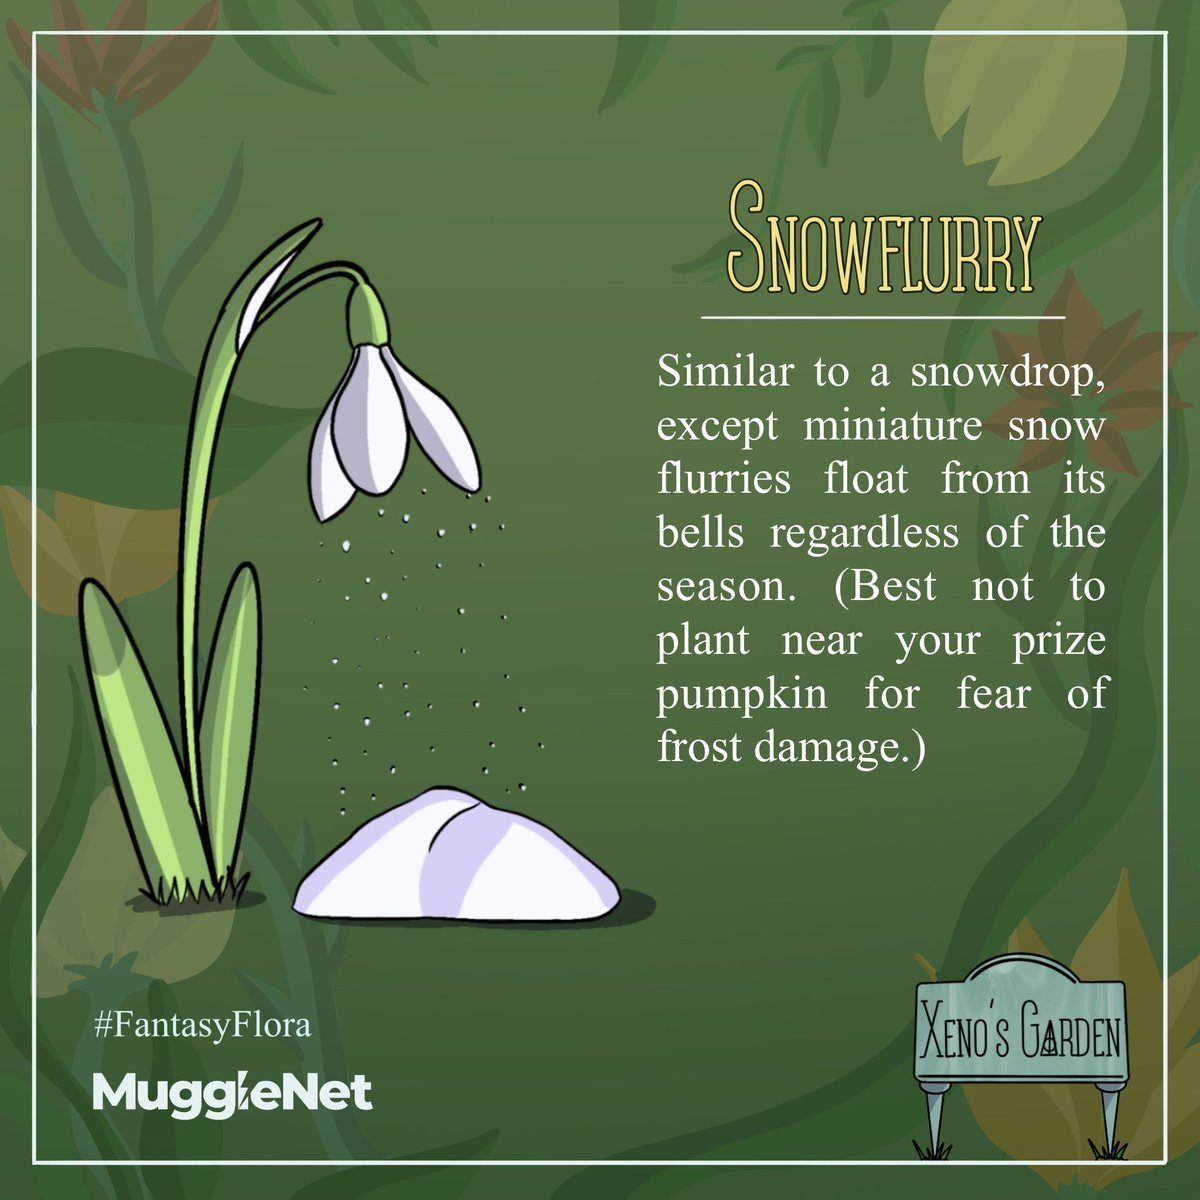 In today's feature of 'Xeno's Garden,' we have the 'Snowflurry.' True to its name, the 'Snowflurry' has tiny snow flurries that drift from its blossoms, no matter the time of year. 🌱 ❄️ #Snowflurry #FantasyFlora